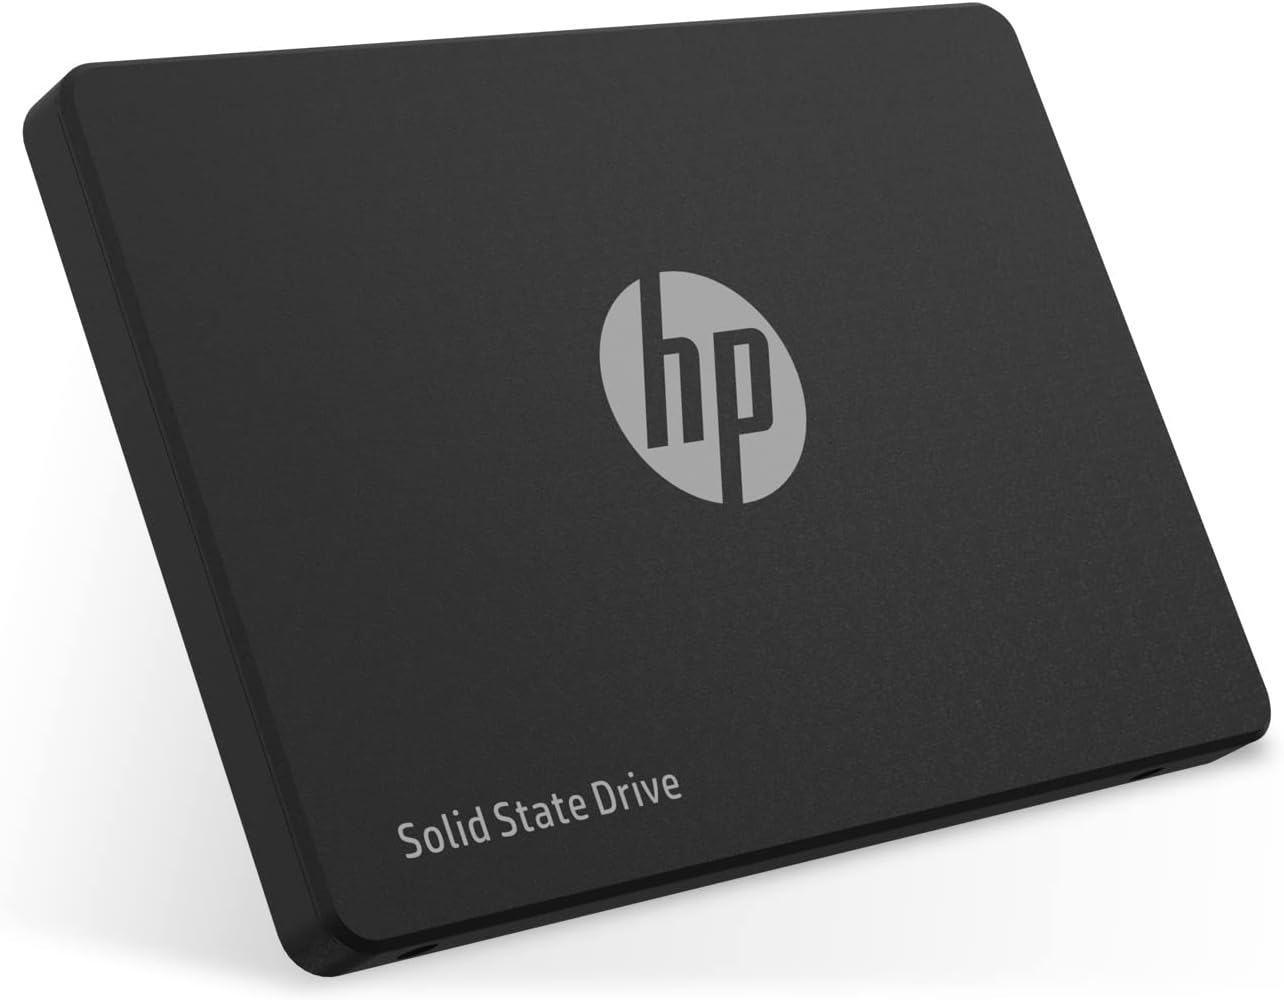 HP S650 240GB 2.5 Inch SATA III PC SSD Internal Solid State Hard Drive - 6 Gb/s, 3D NAND, Up to 540 MB/s for Laptop and Desktop Updating - 345M8AA#ABA